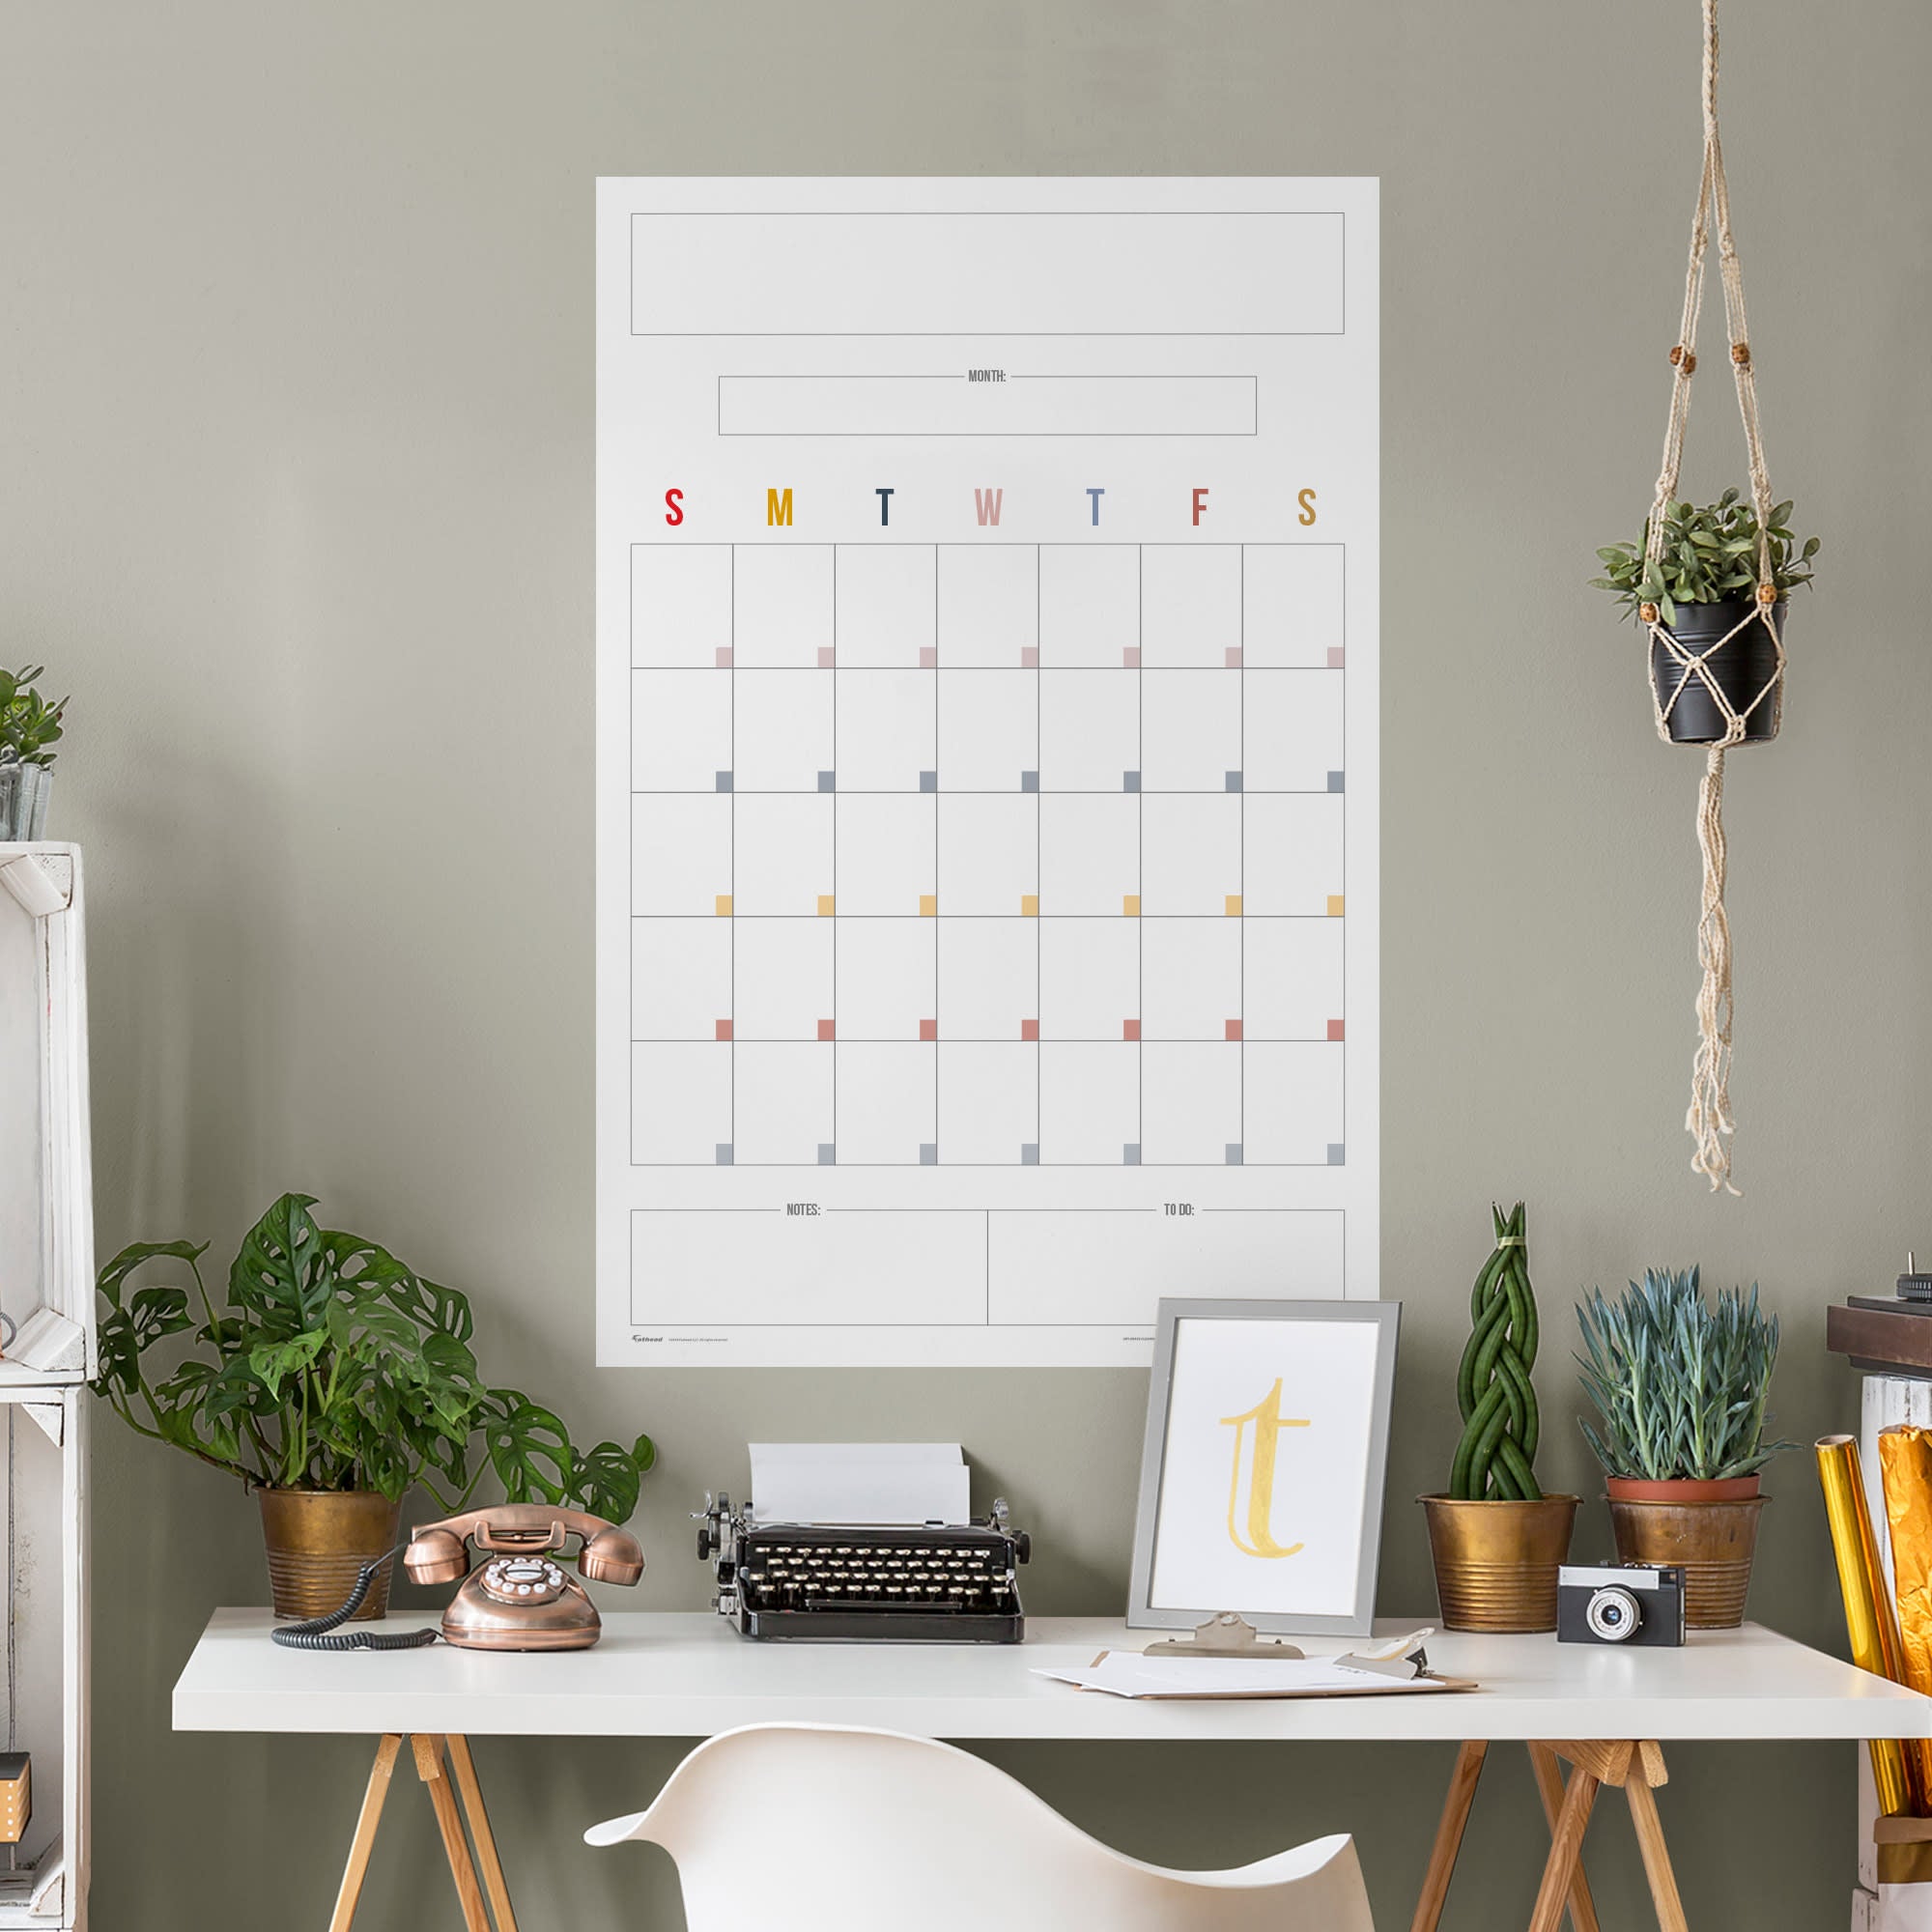 One Month Calendar: Color Block Design - Removable Dry Erase Vinyl Decal 26.0"W x 39.5"H by Fathead